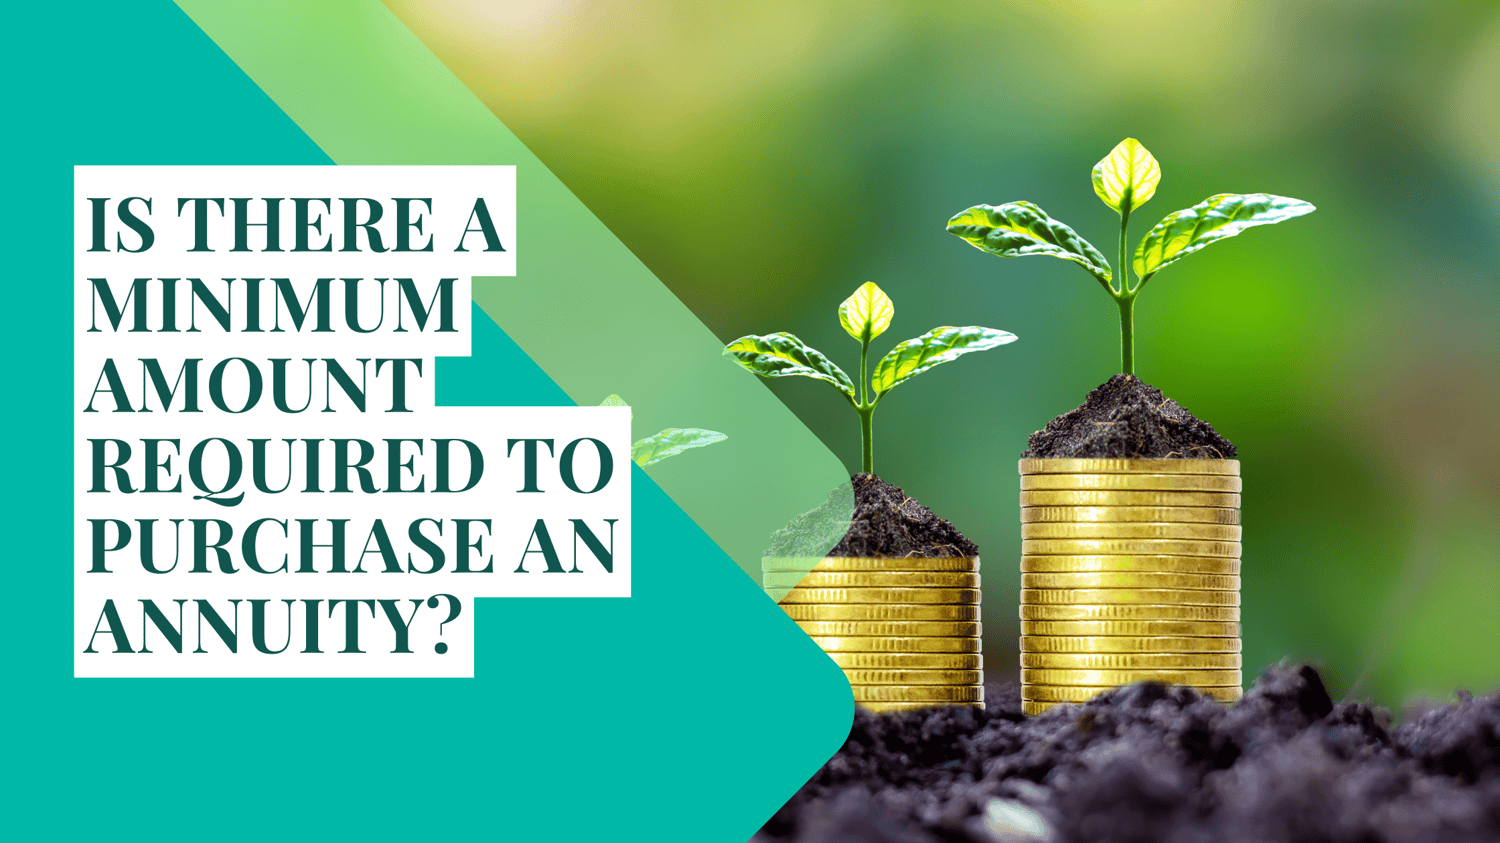 IS THERE A MINIMUM AMOUNT REQUIRED TO PURCHASE AN ANNUITY?